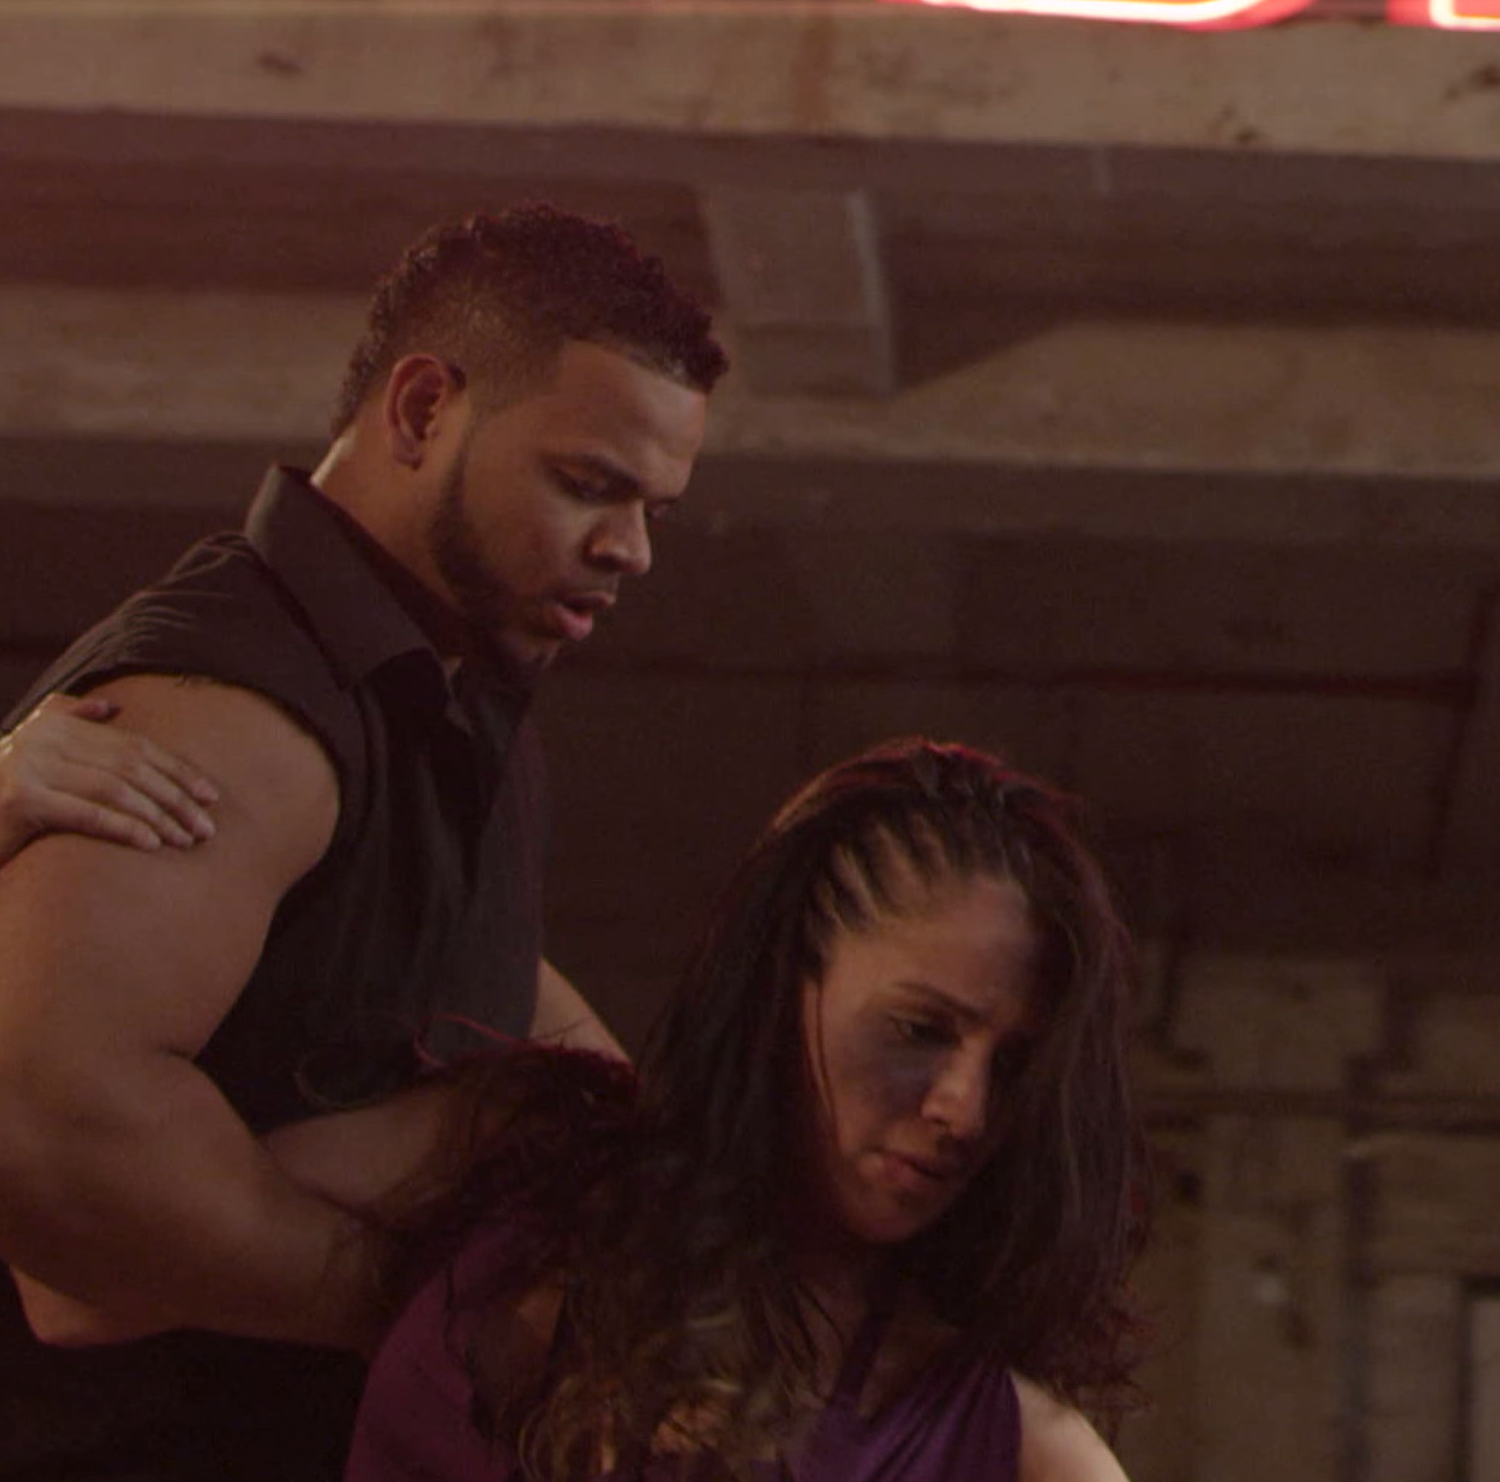 “Santo” film takes on domestic abuse with dance